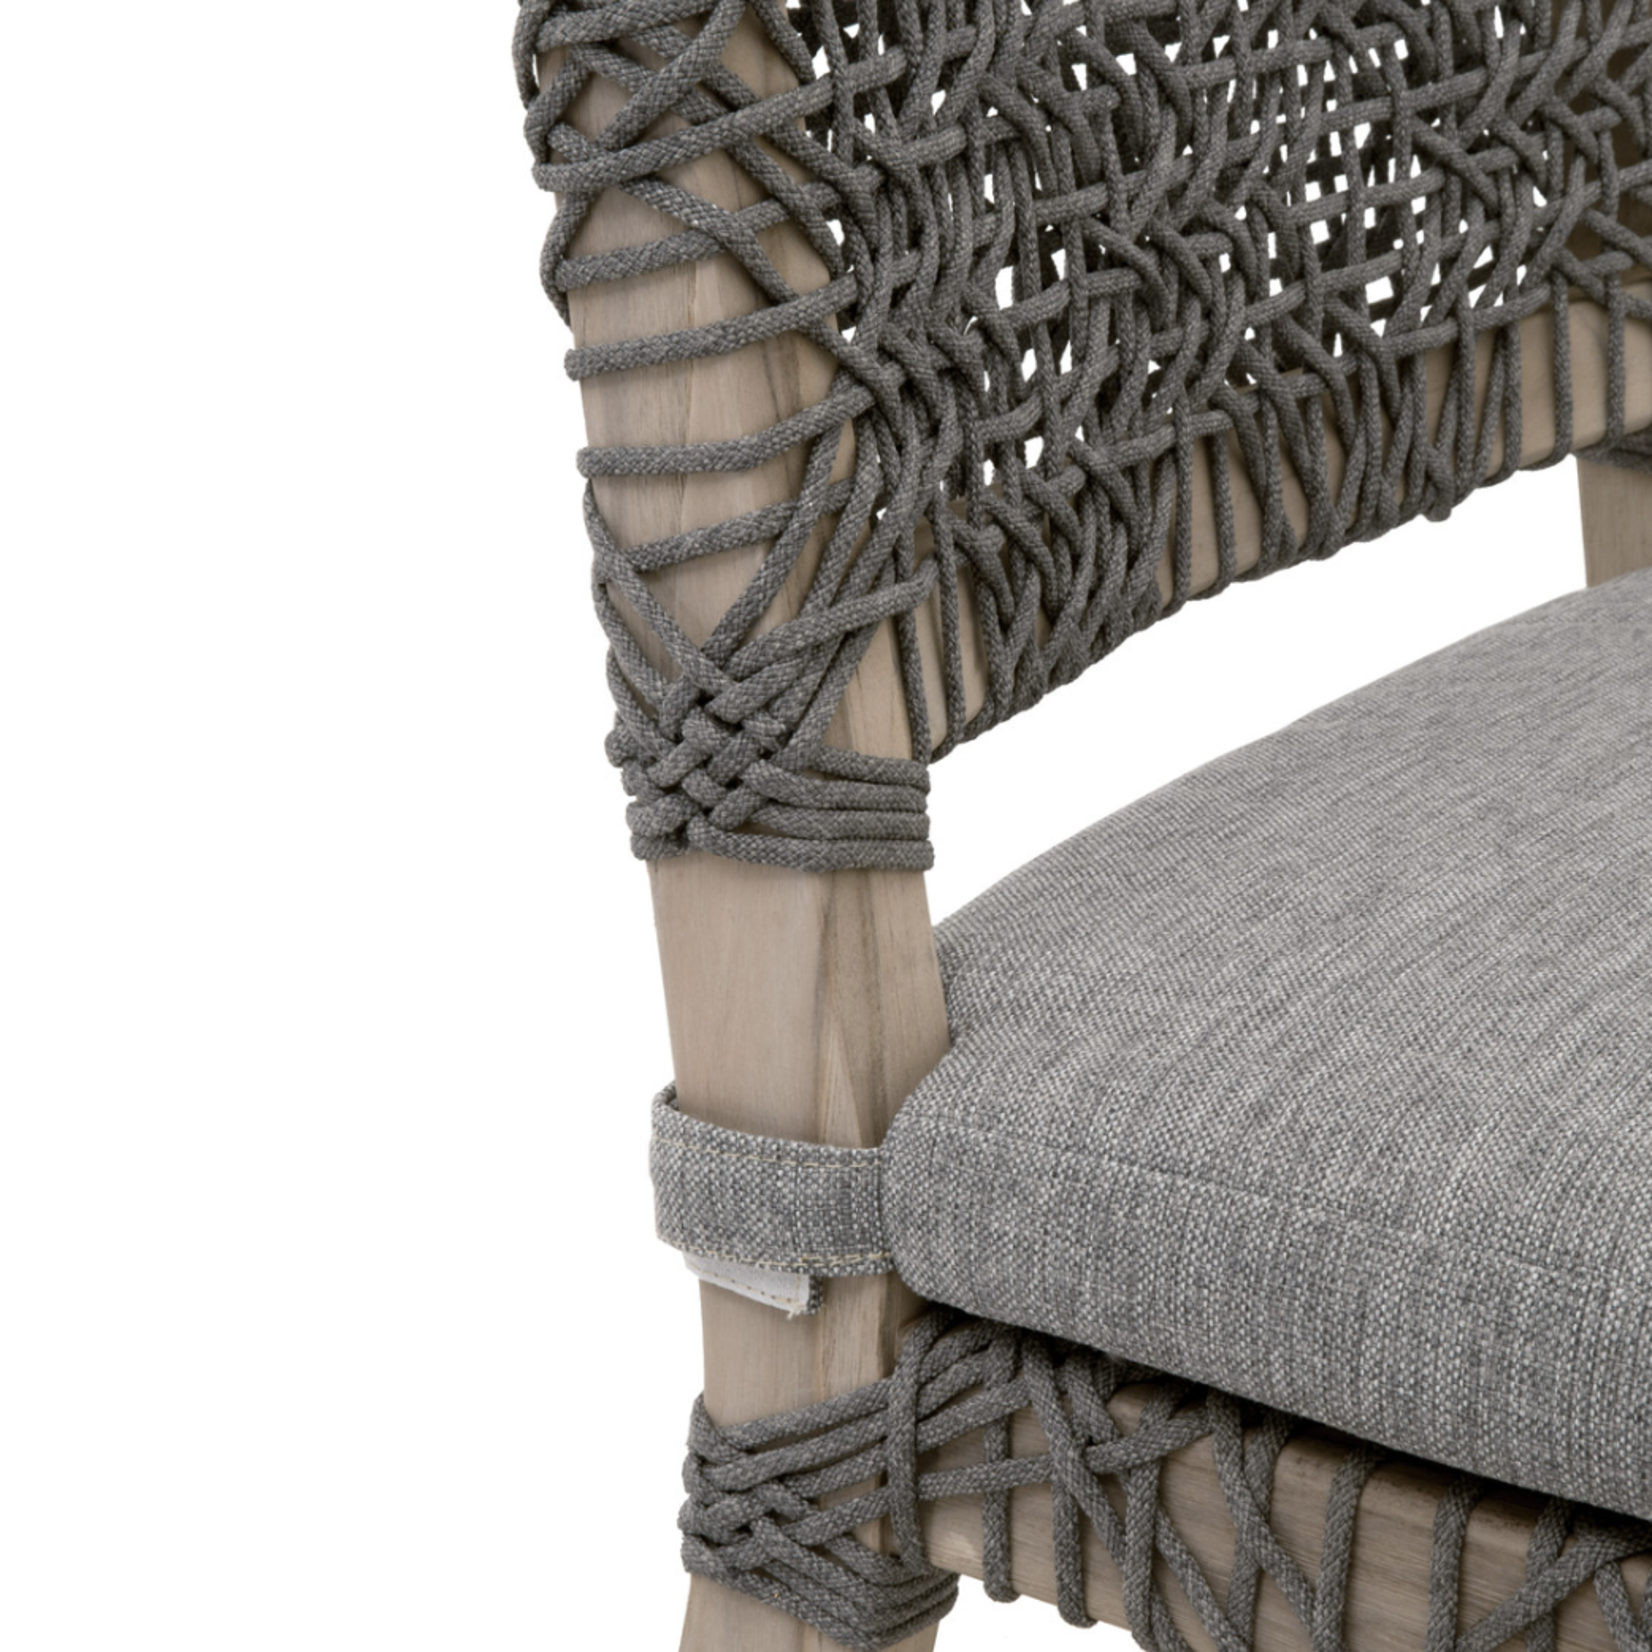 Outside The Box Costa Dove Rope Outdoor Dining Chair